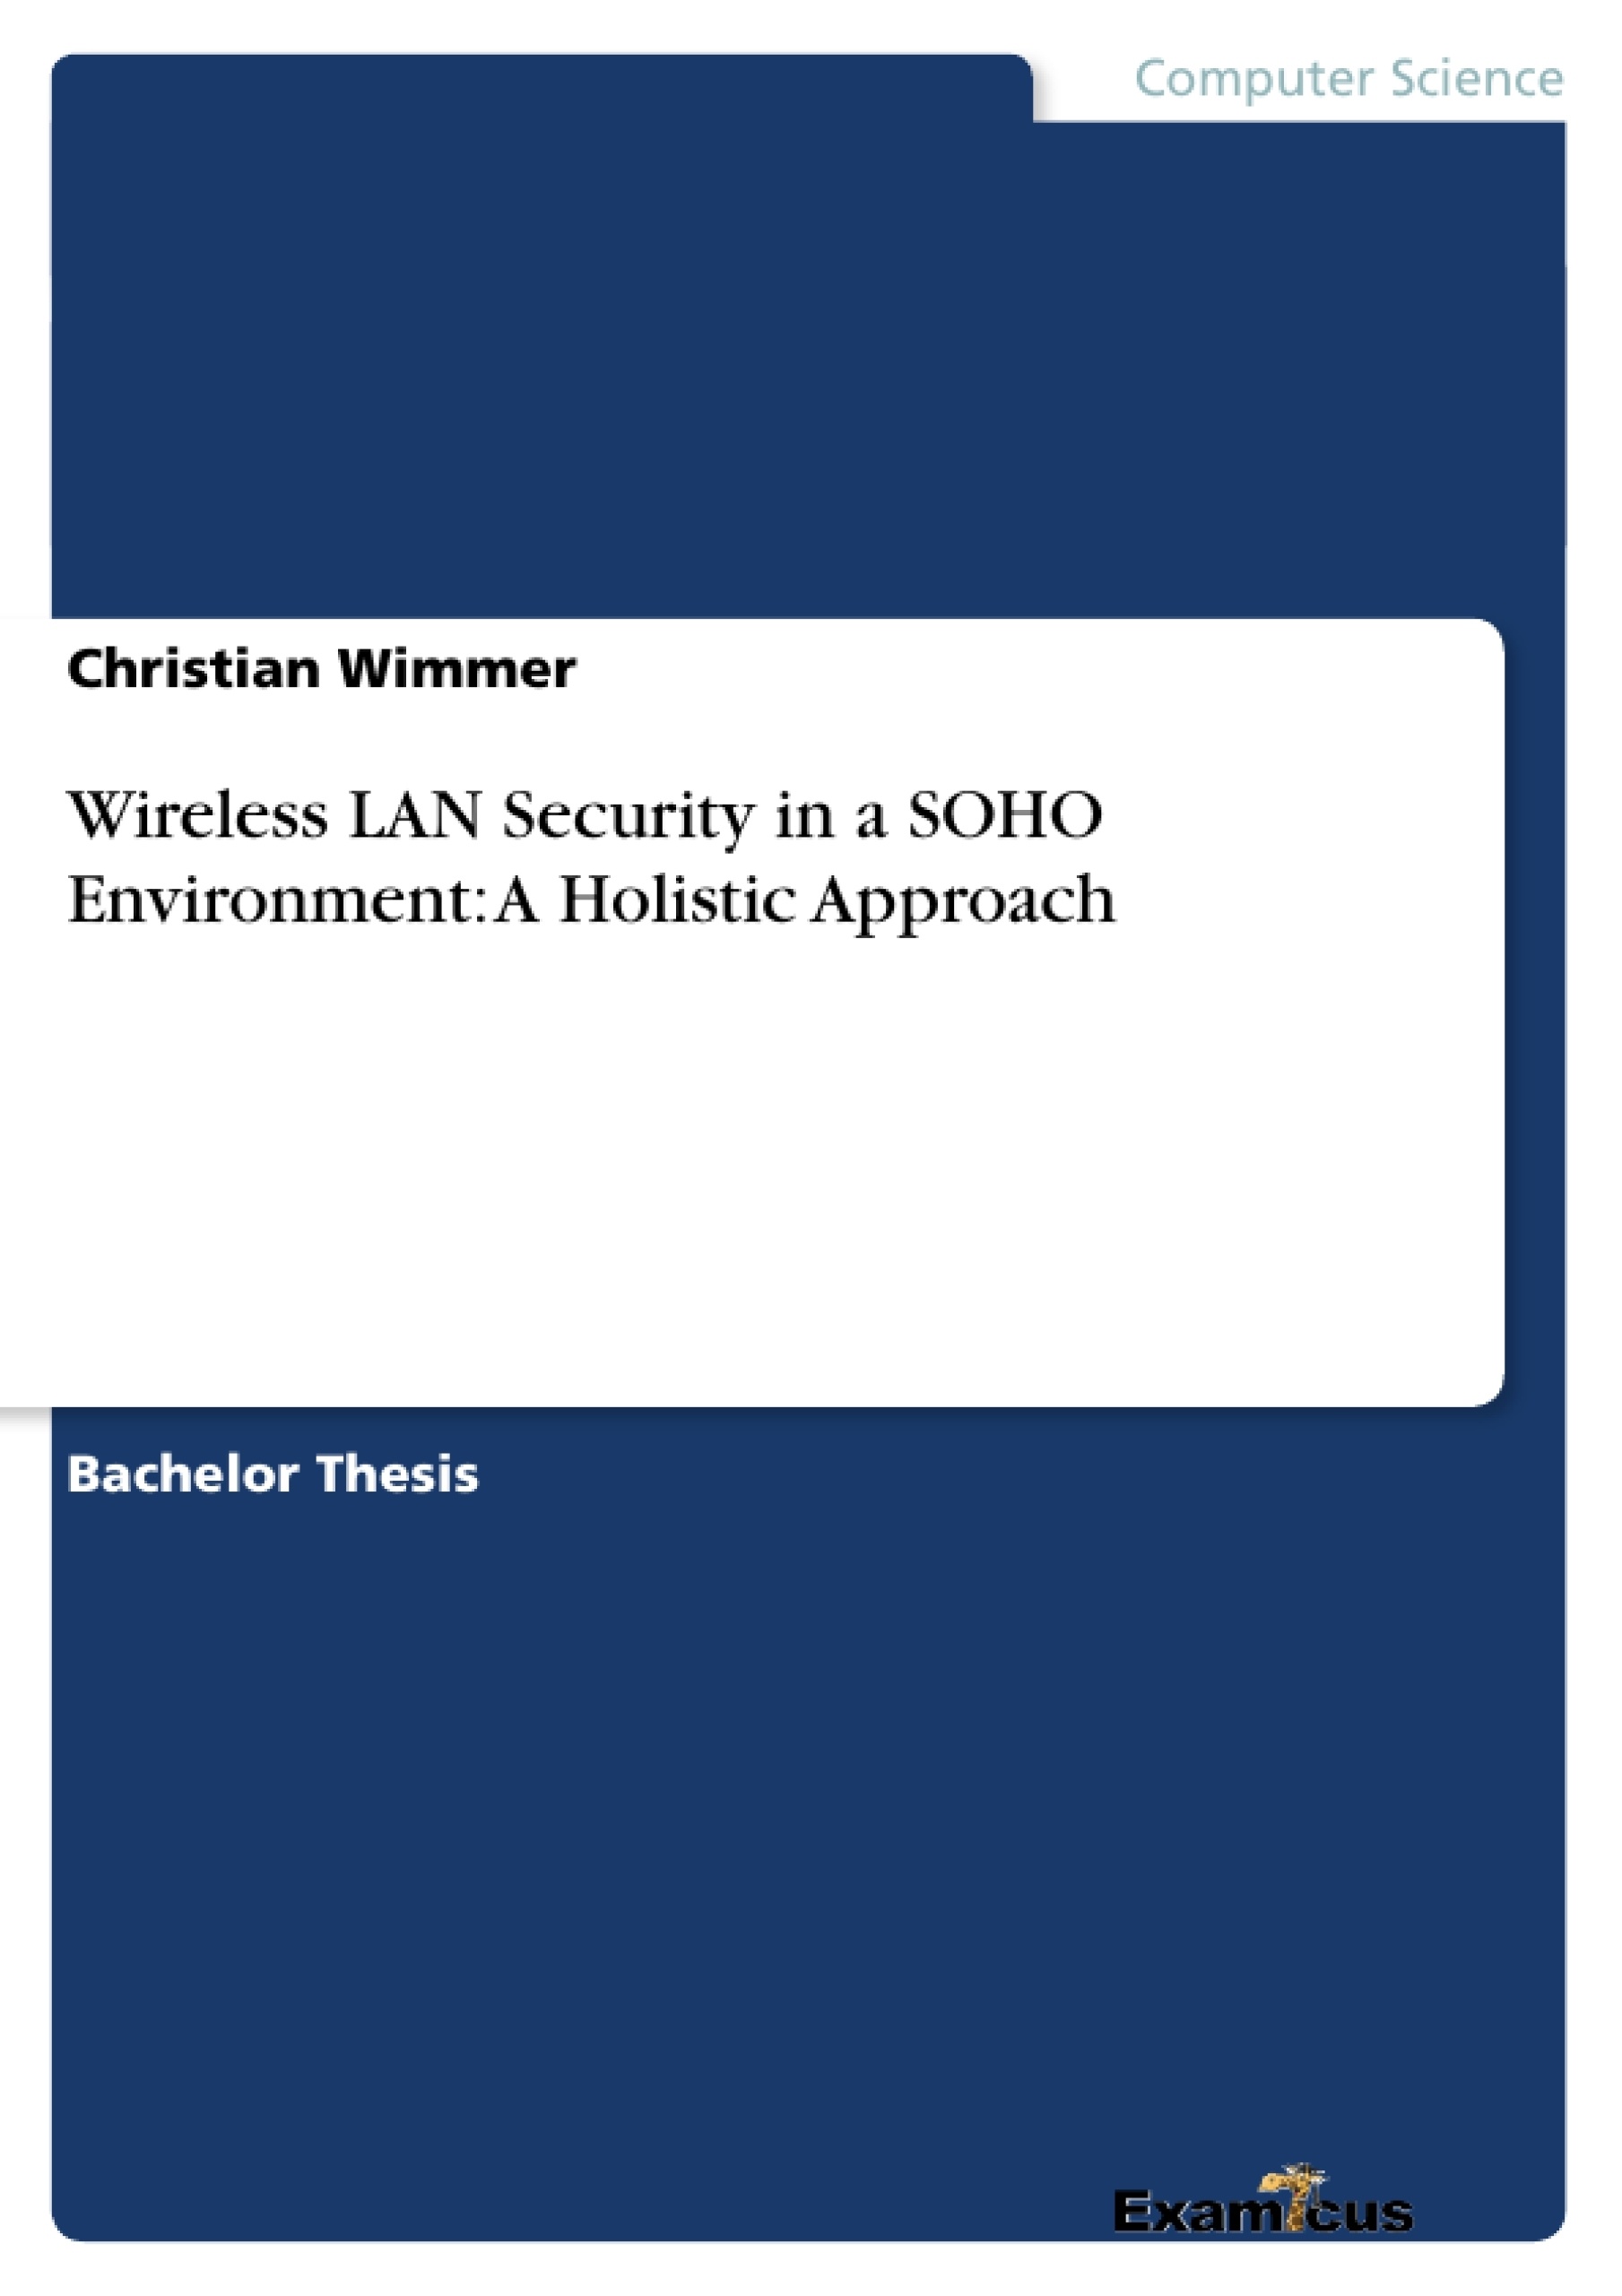 Title: Wireless LAN Security in a SOHO Environment: A Holistic Approach